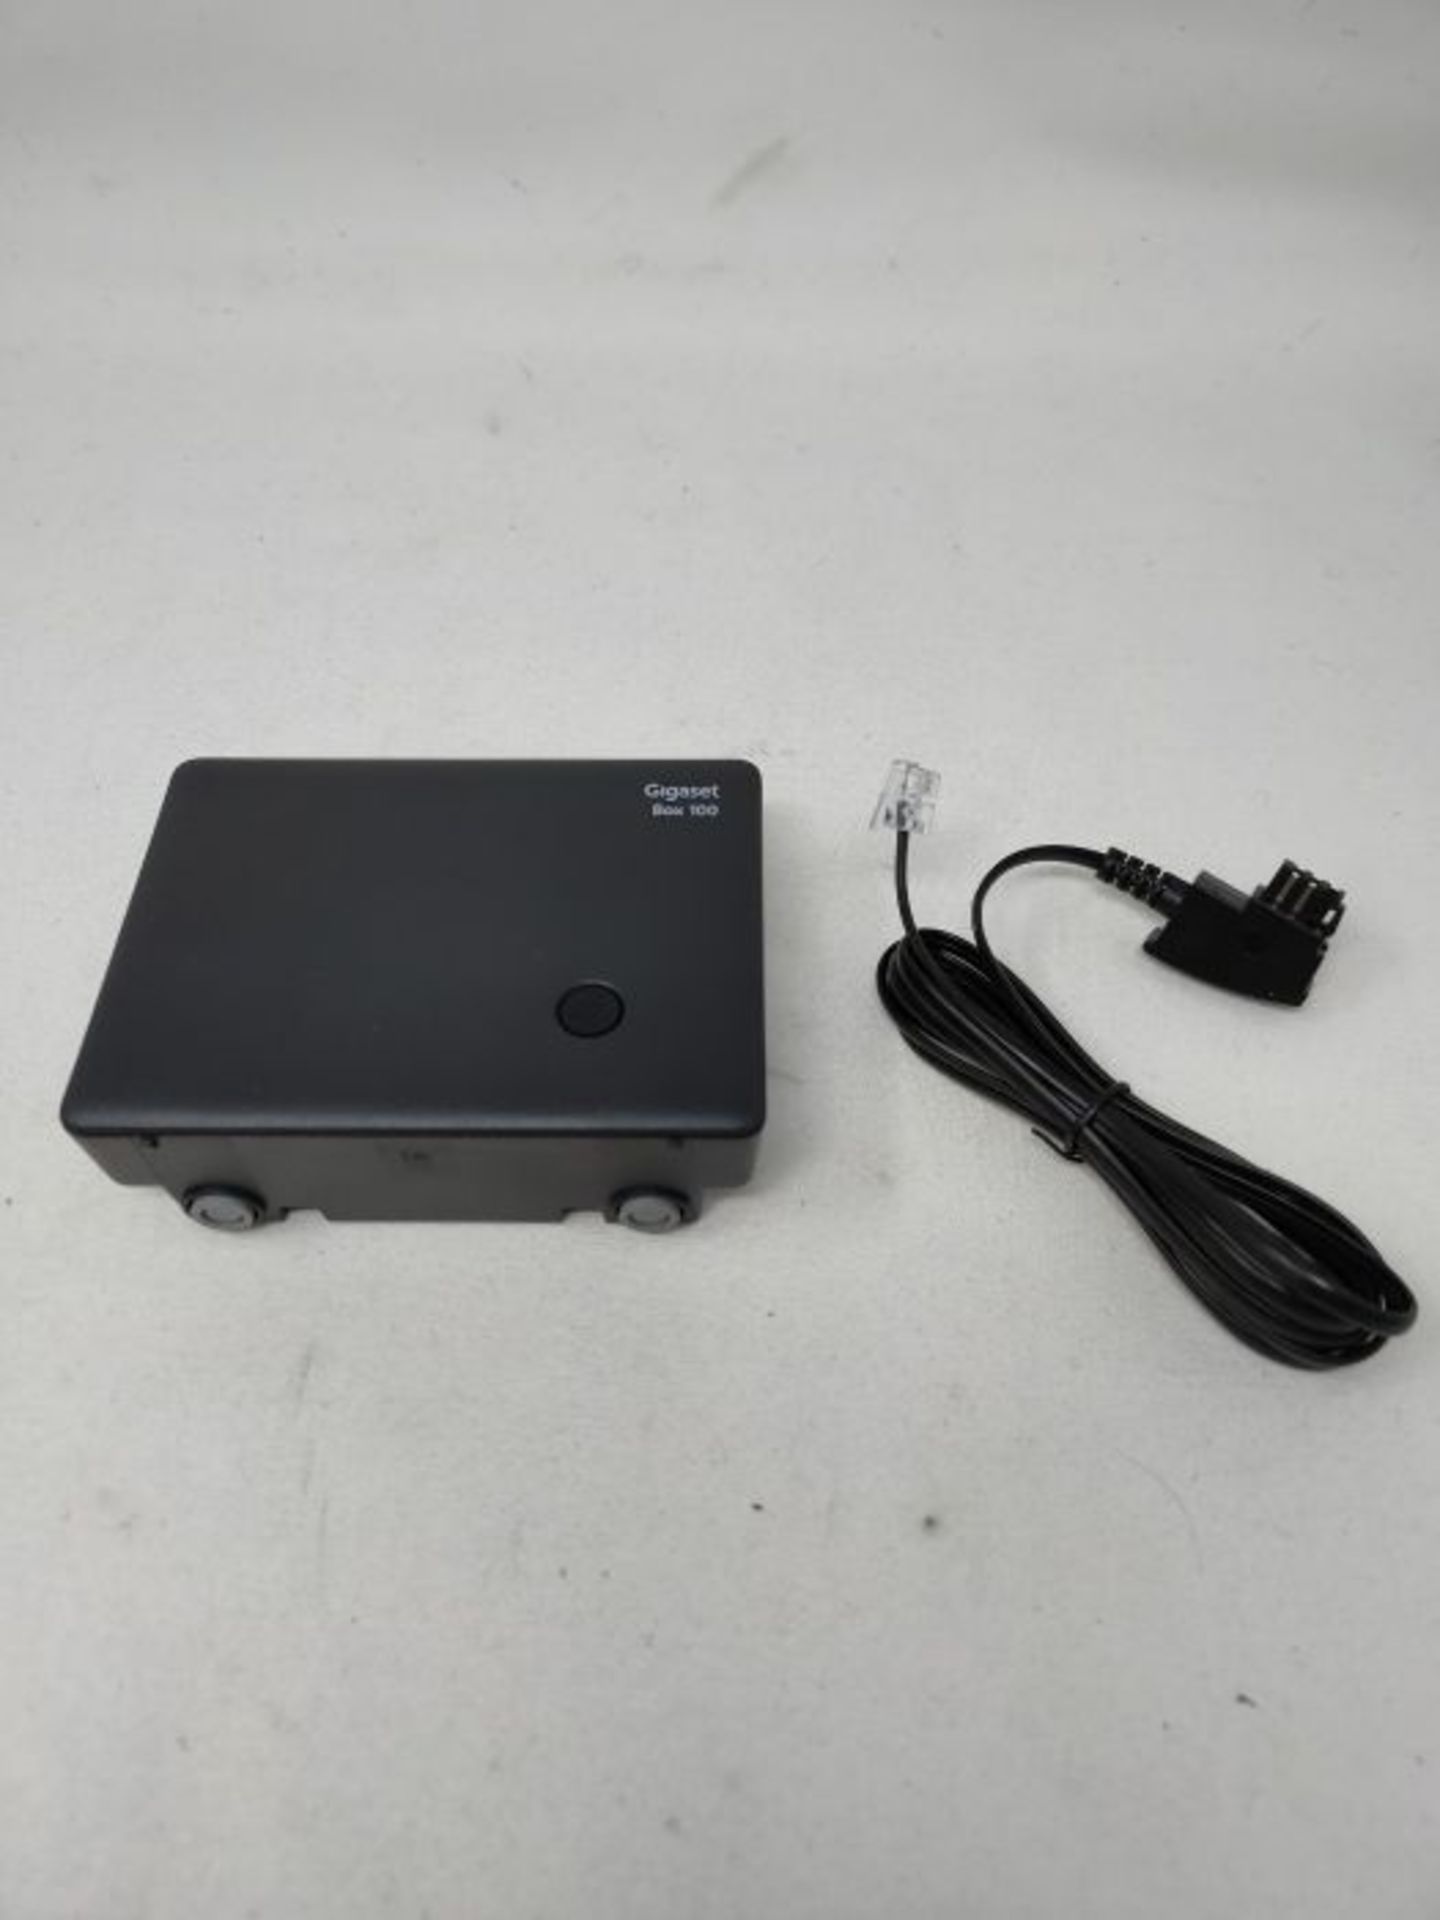 Gigaset DECT base station box 100 for your own communication system with Gigaset hands - Image 3 of 3